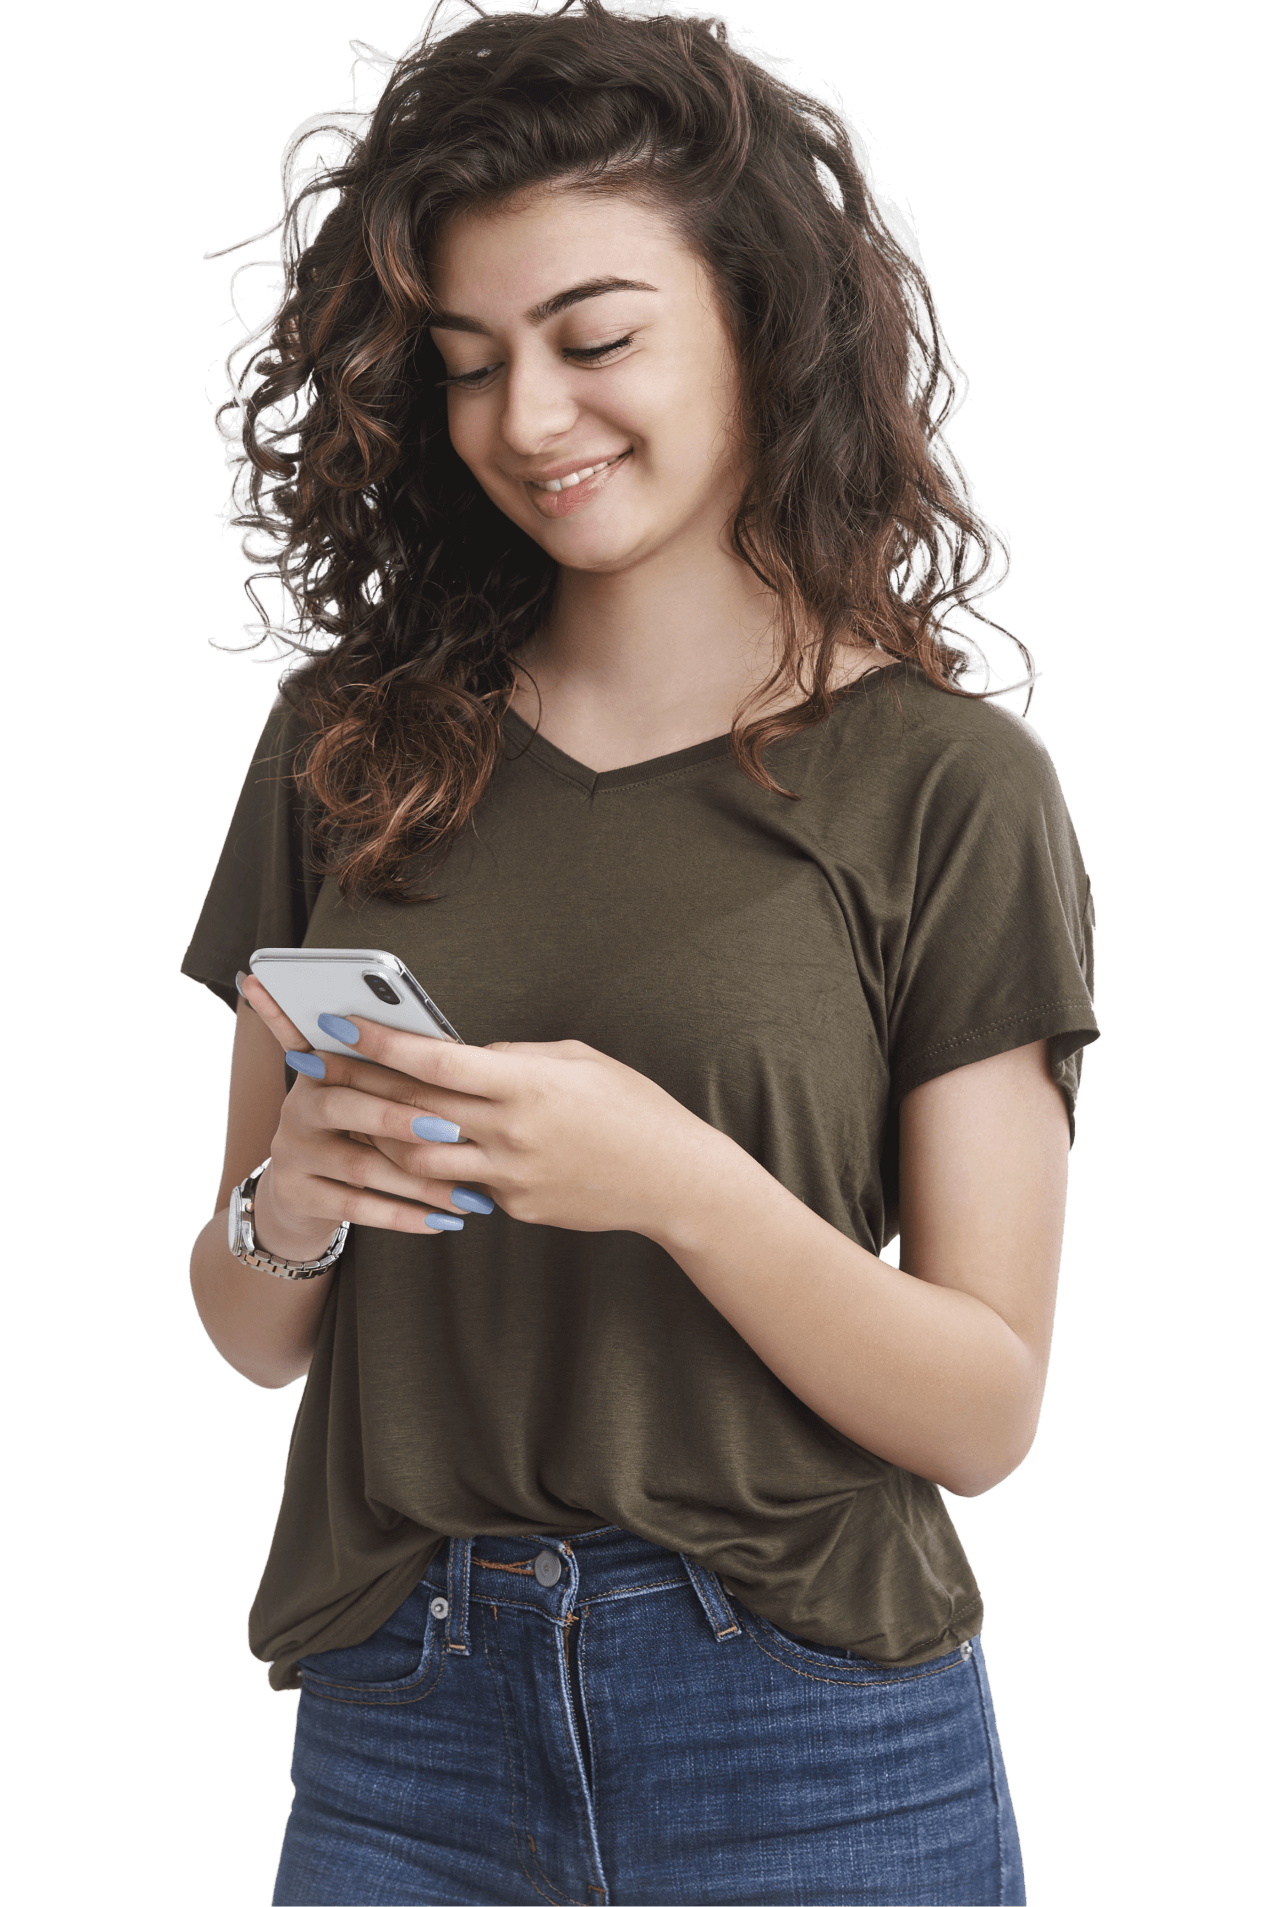 A beautiful girl with curly hair wearing green top smiling at her iphone screen 